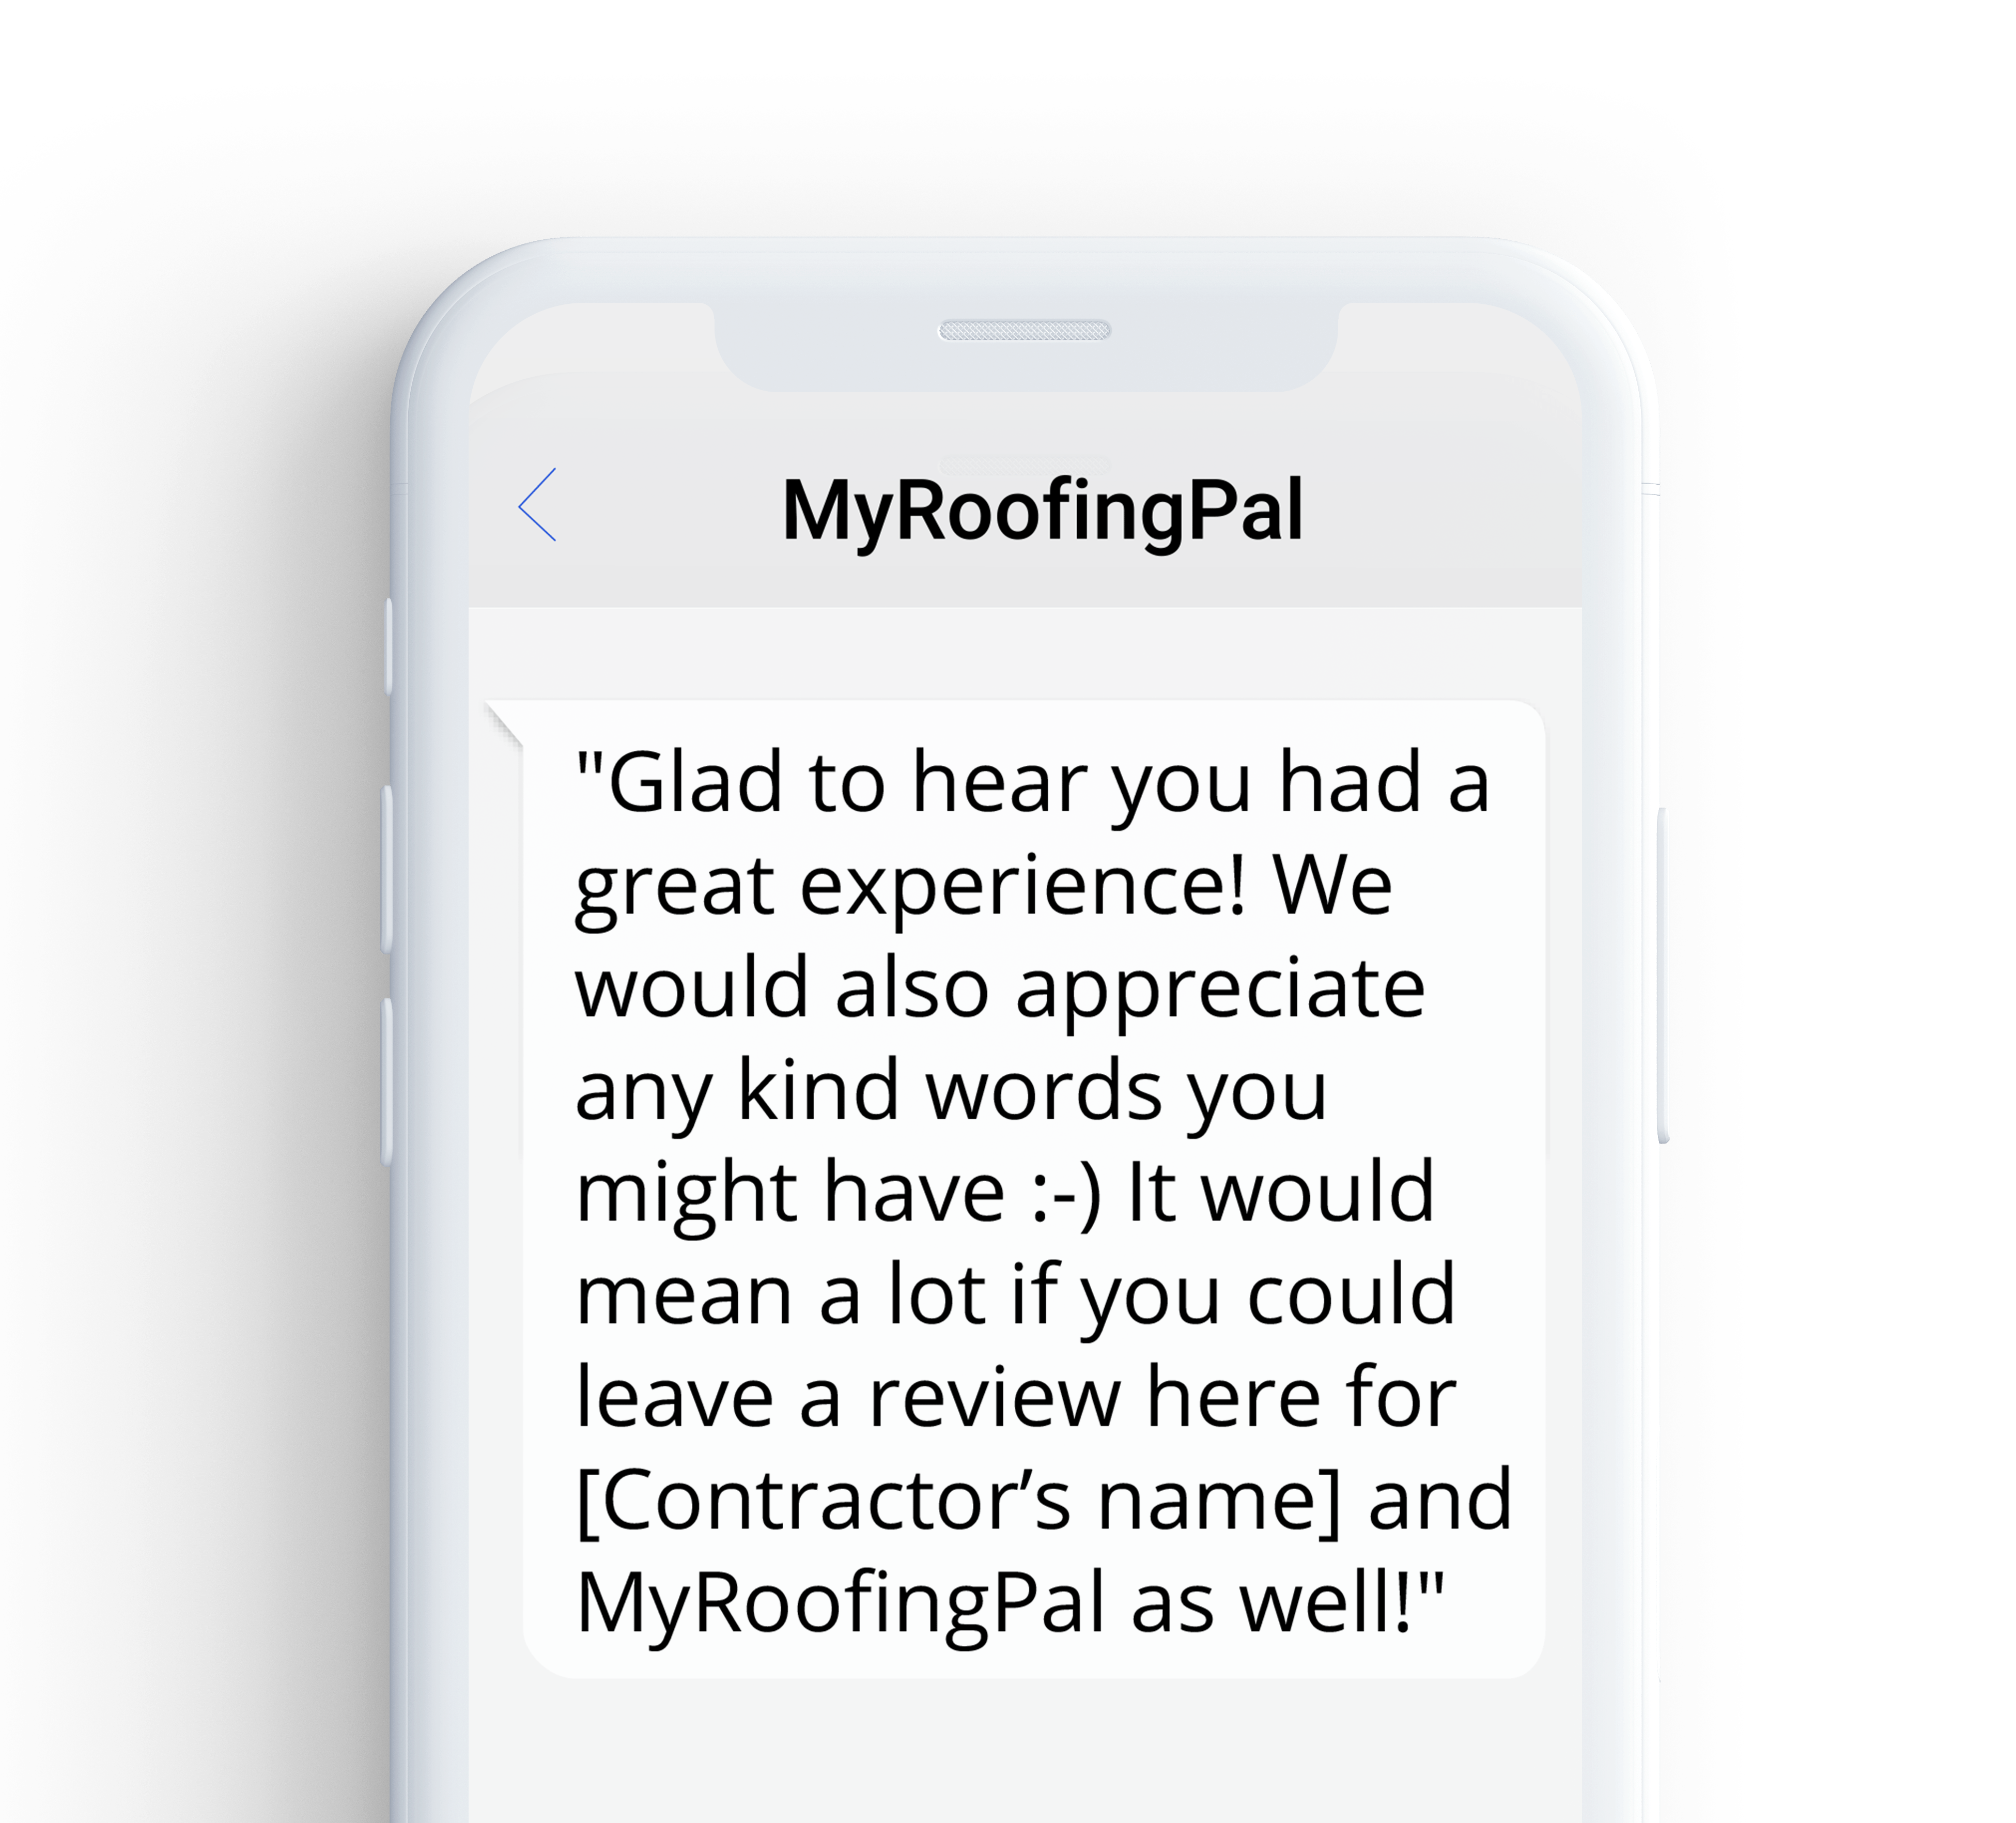 MyRoofingPal great experience SMS screenshot